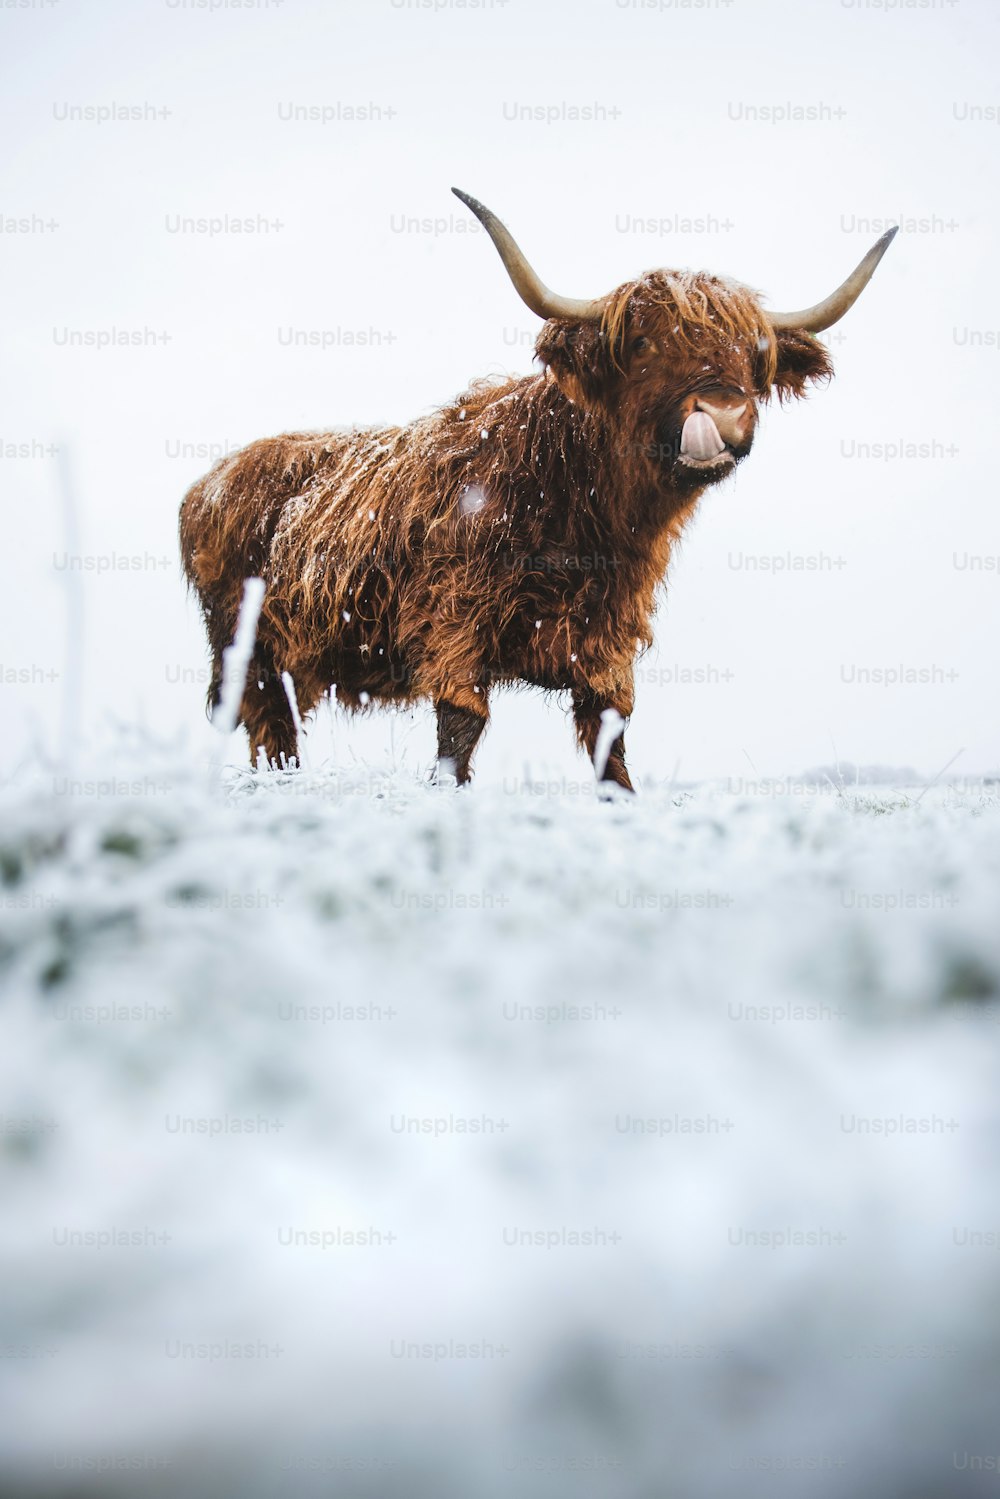 a yak with large horns standing in the snow